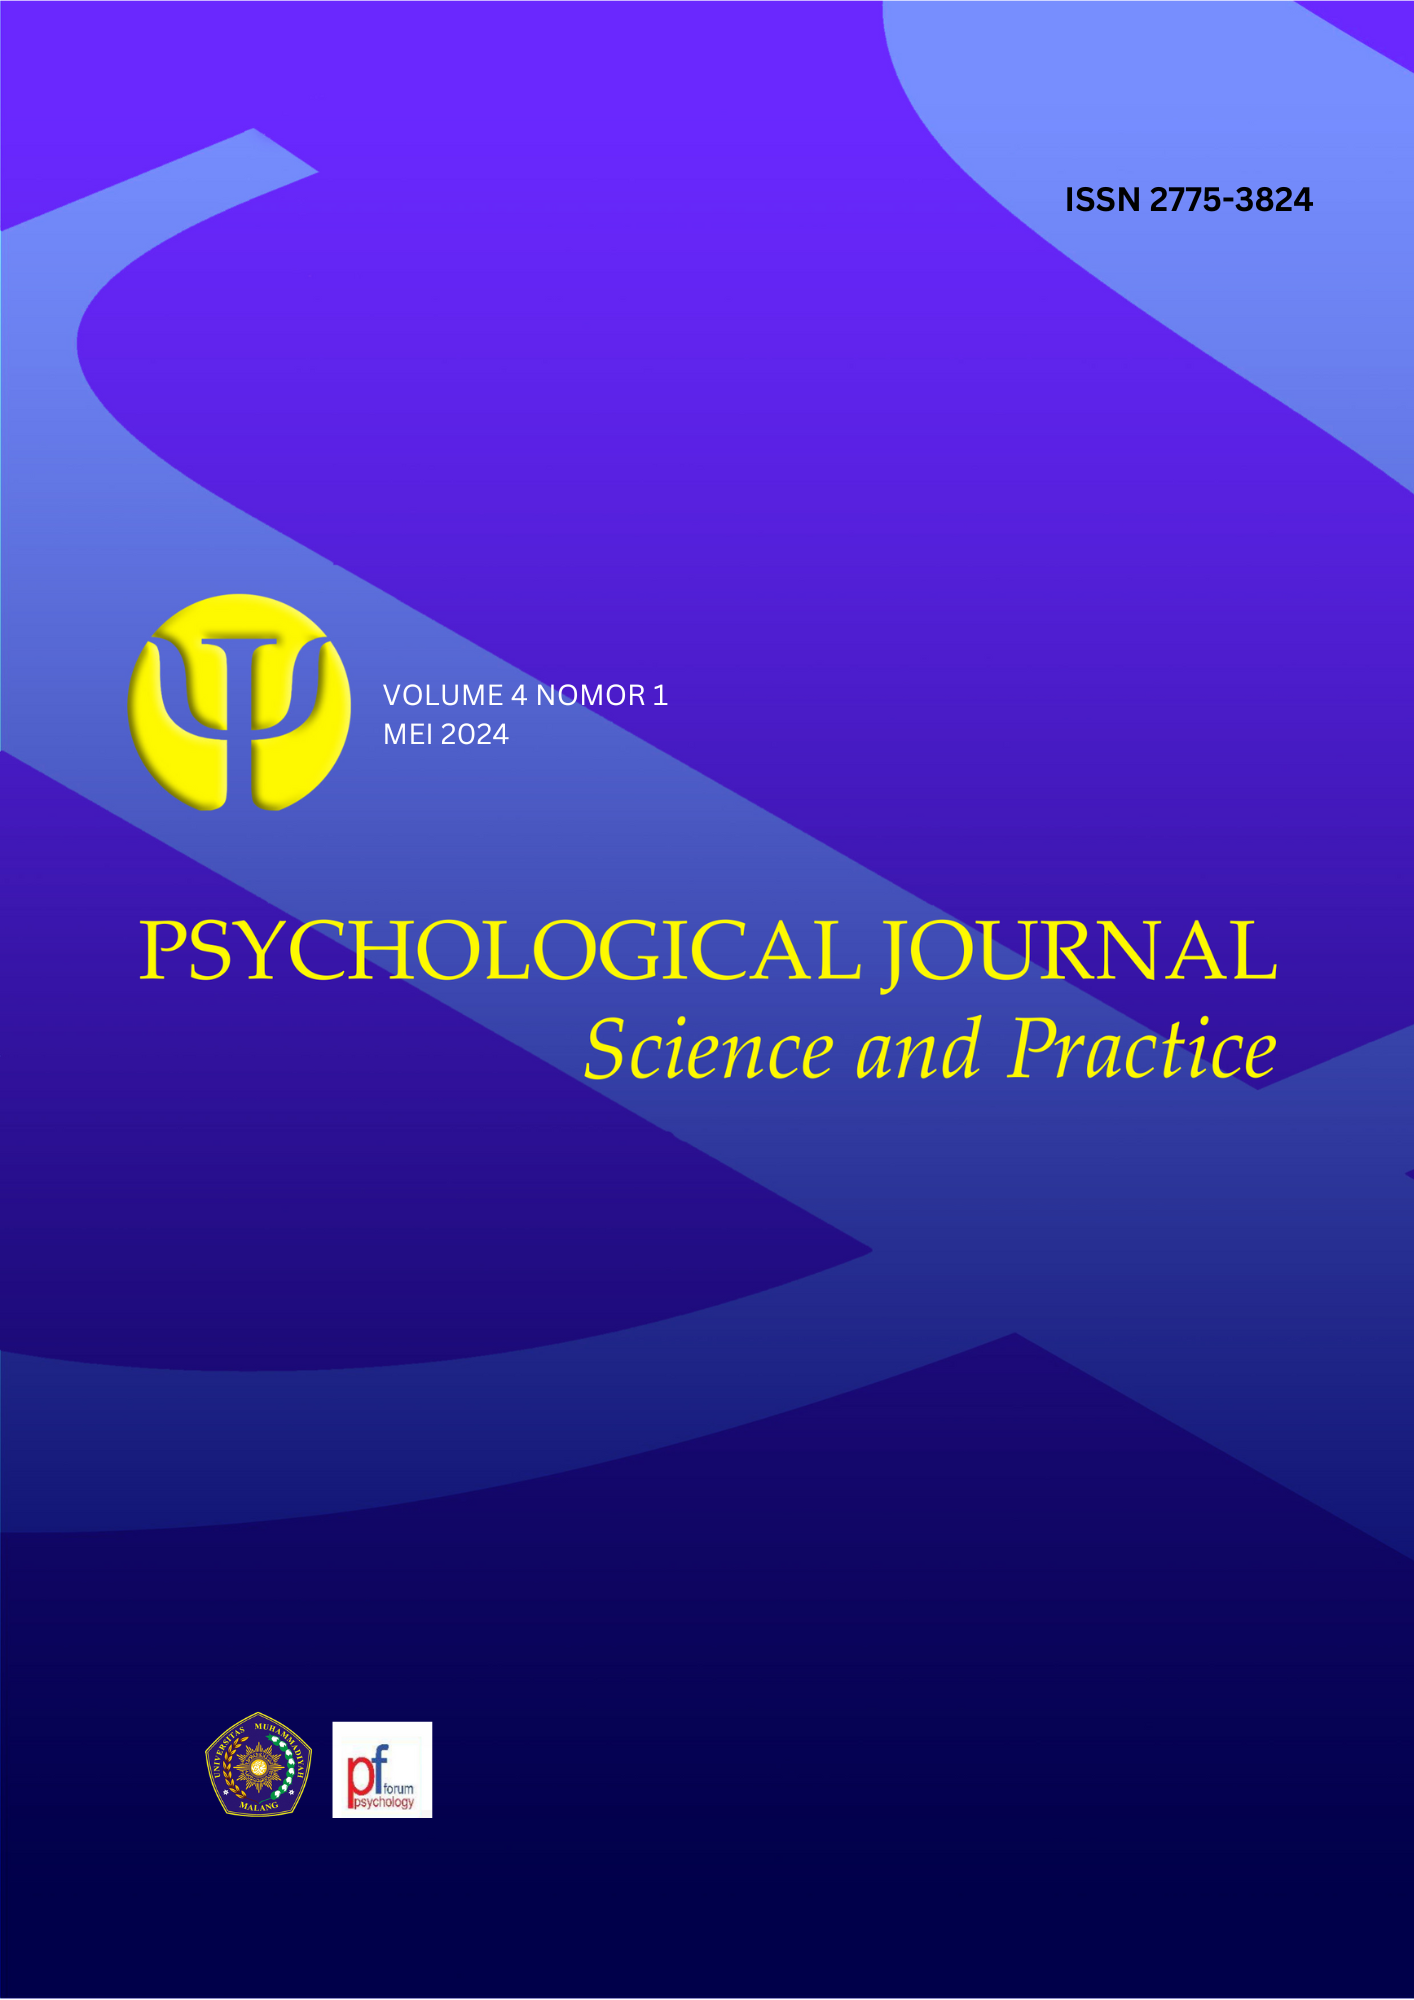 					View Vol. 4 No. 1 (2024): Psychological Journal: Science and Practice
				